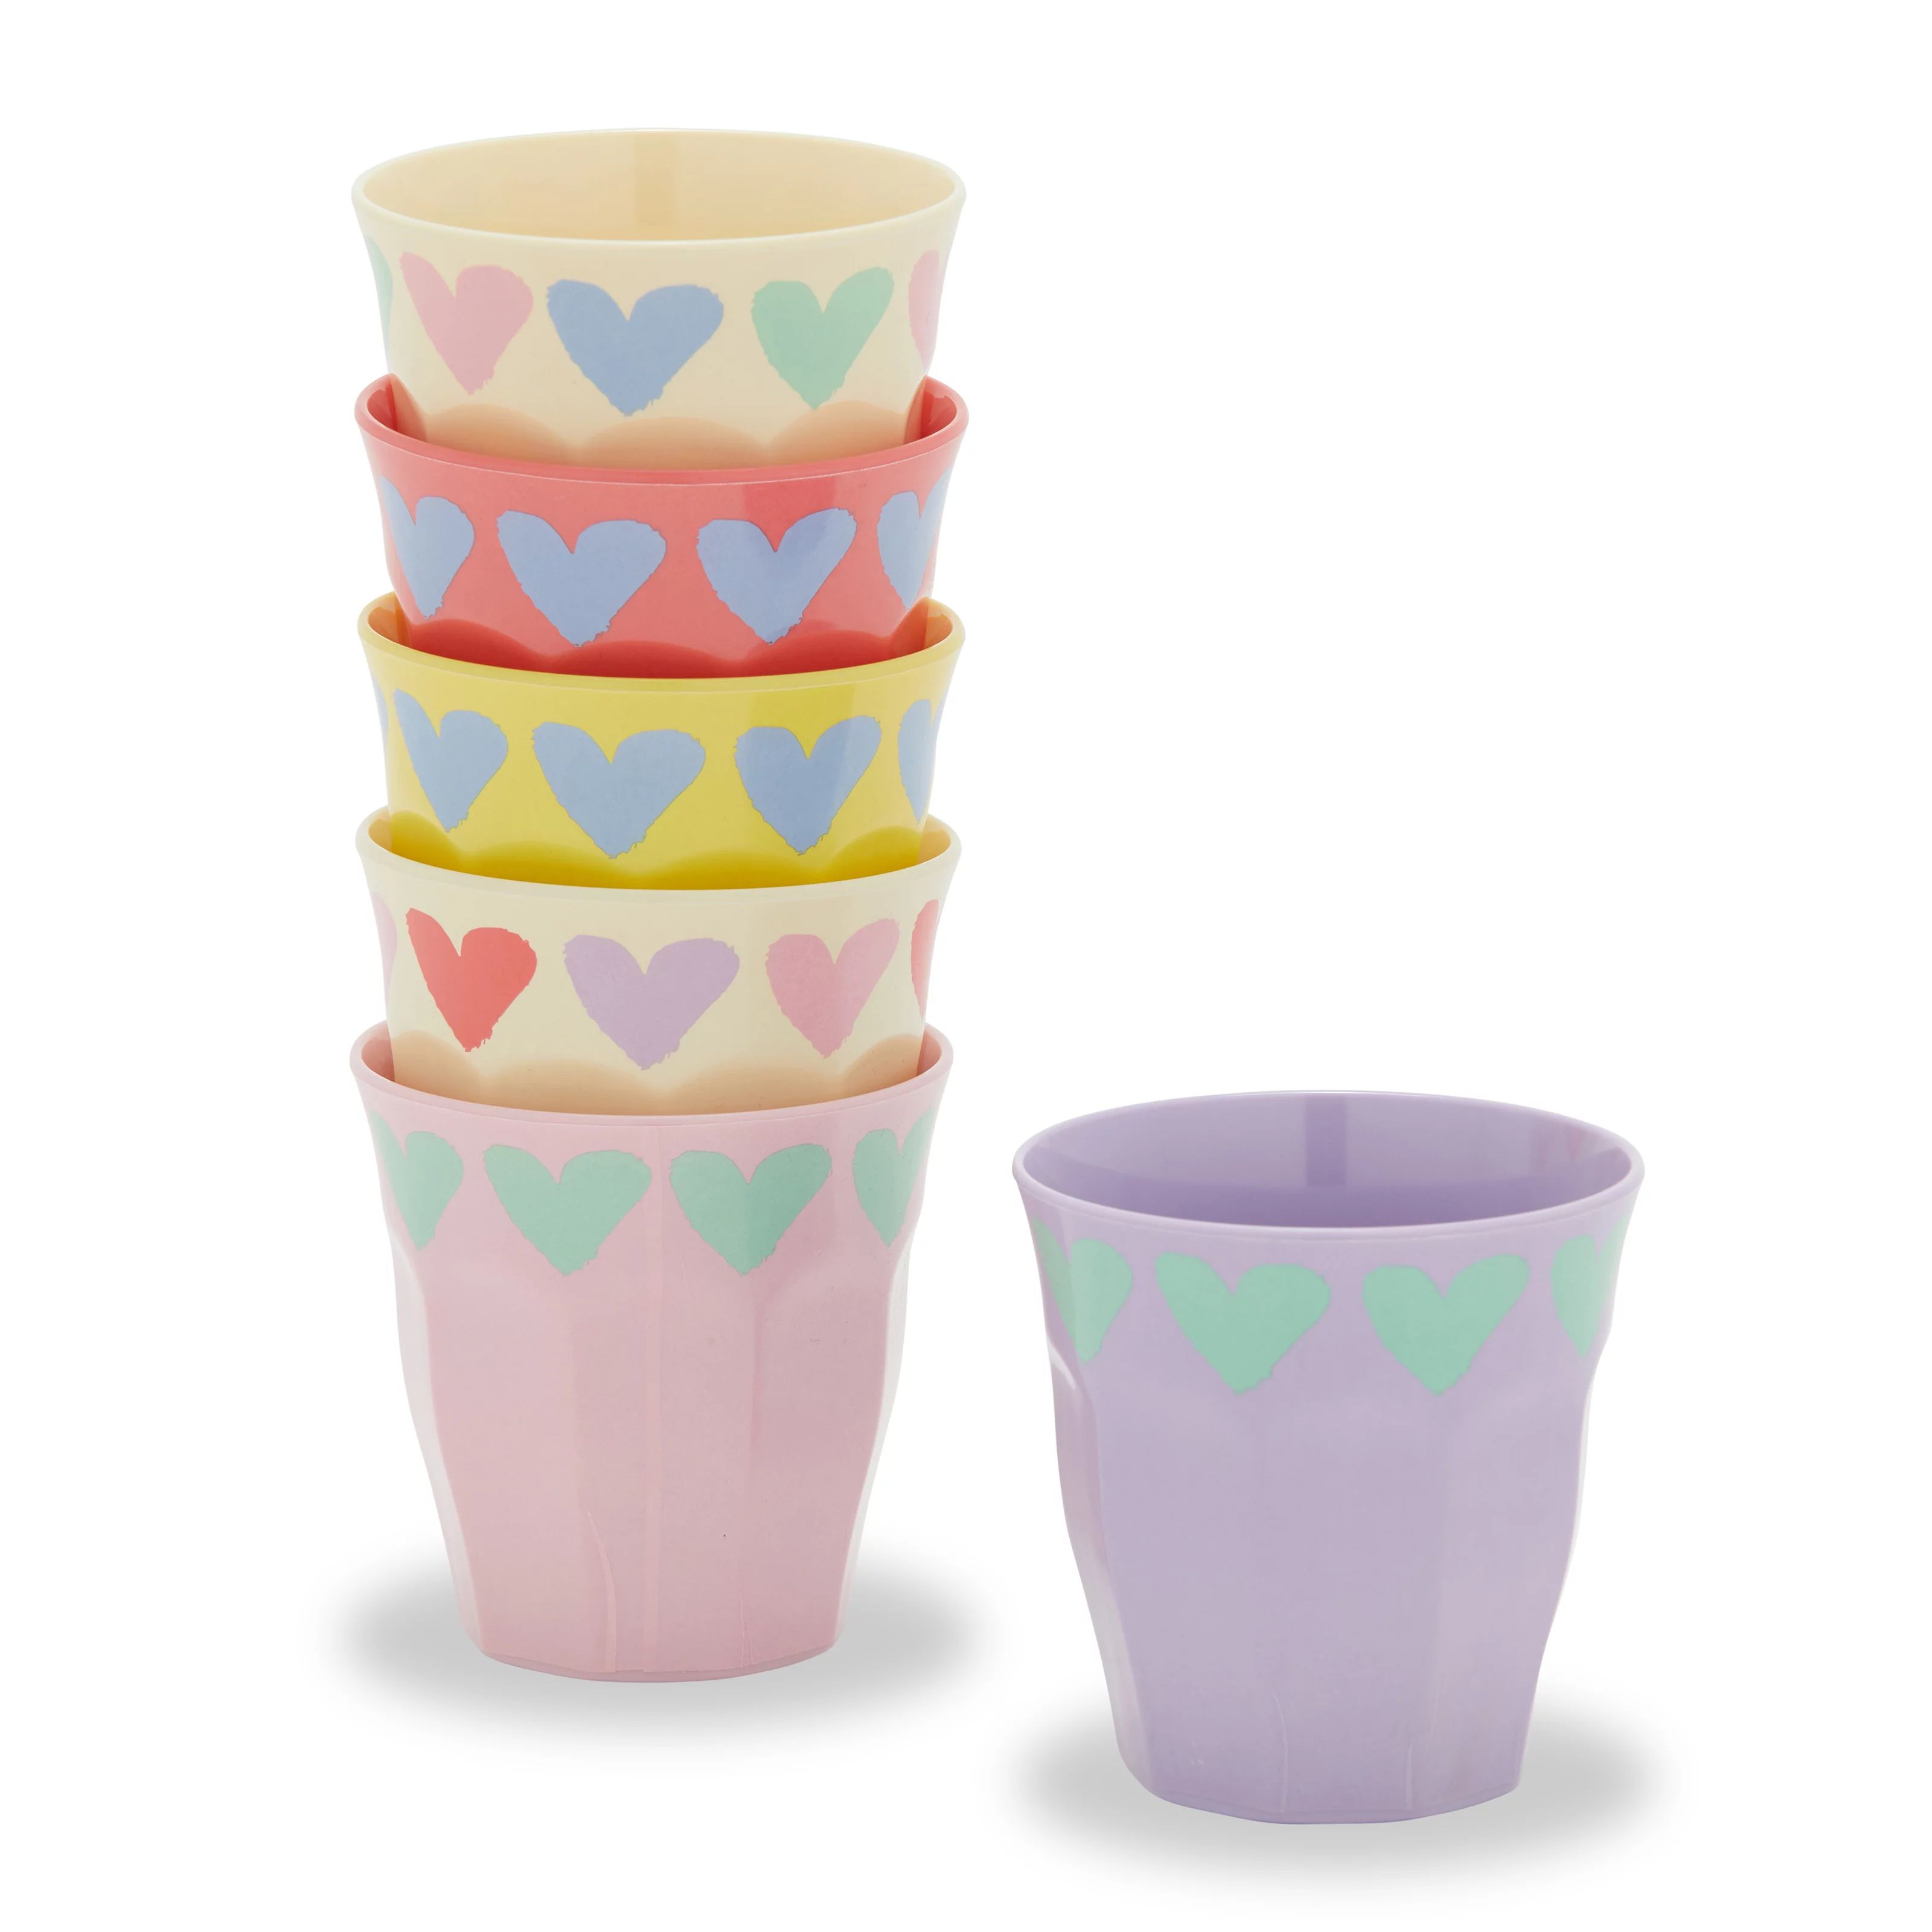 I Heart You Cup, 6 Pack by Drew Barrymore Flower Kids | Walmart (US)